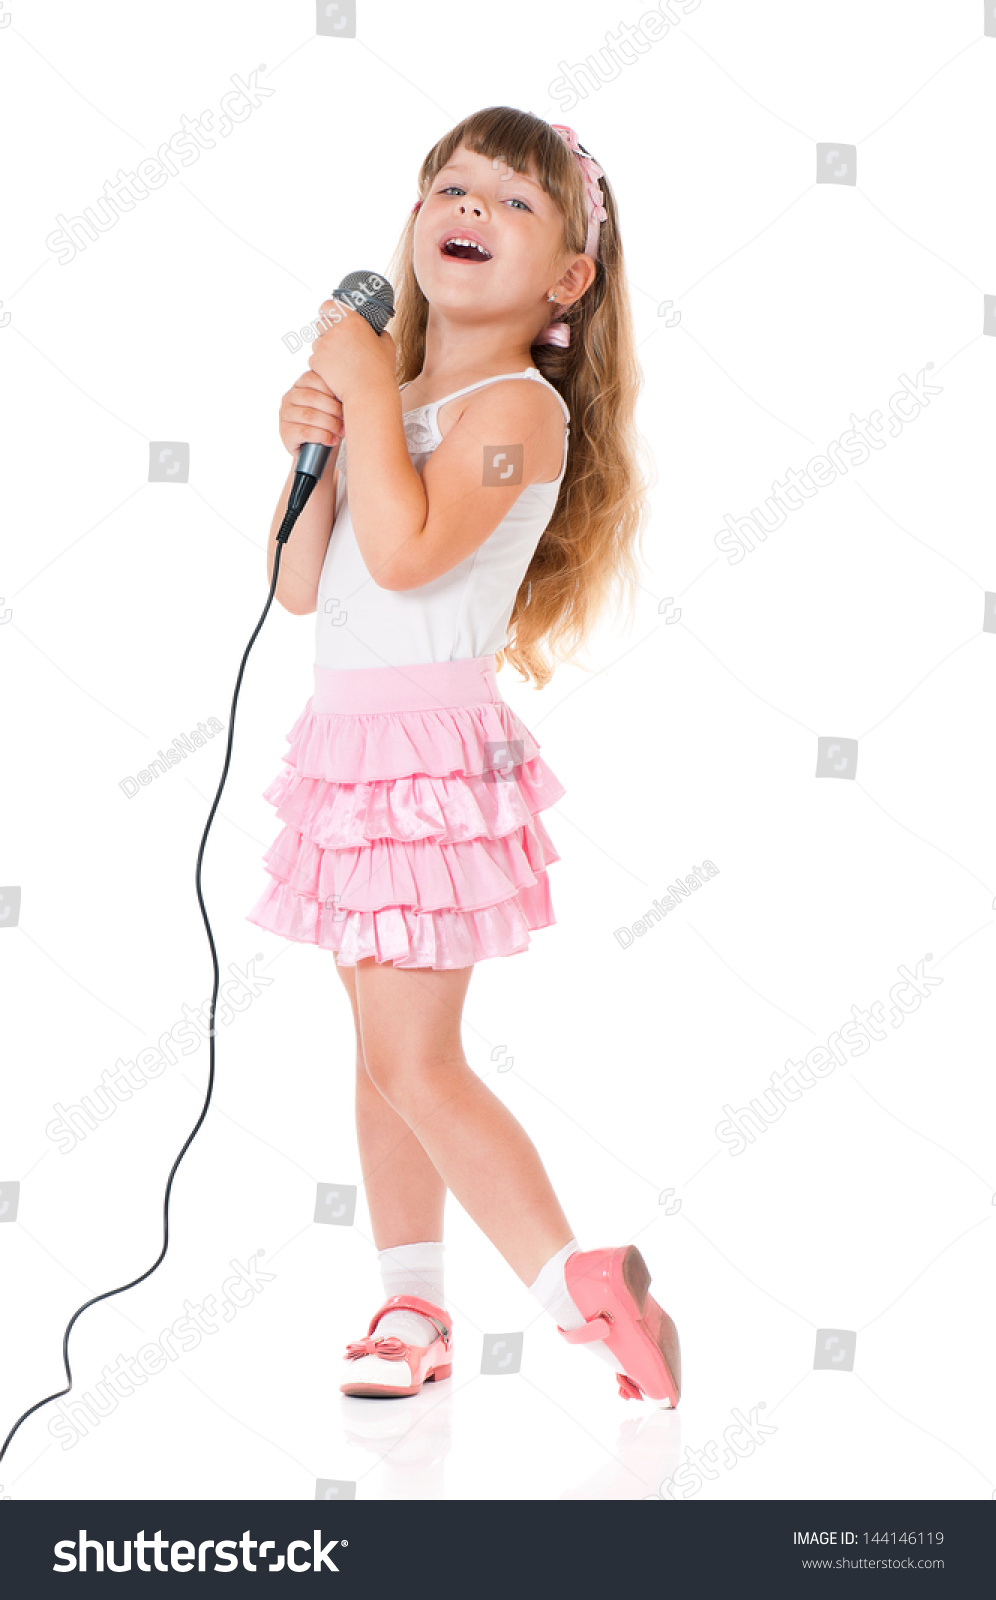 Beautiful little girl with microphone isolated on white background #144146119